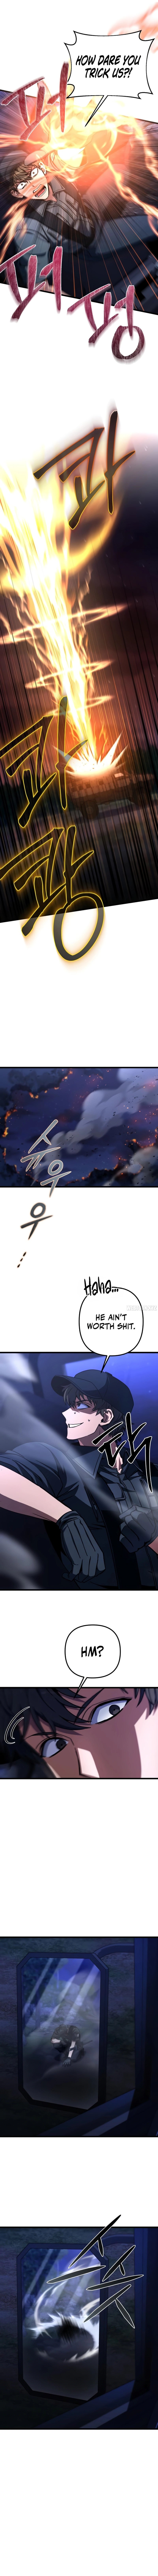 the-genius-assassin-who-takes-it-all-chap-3-9